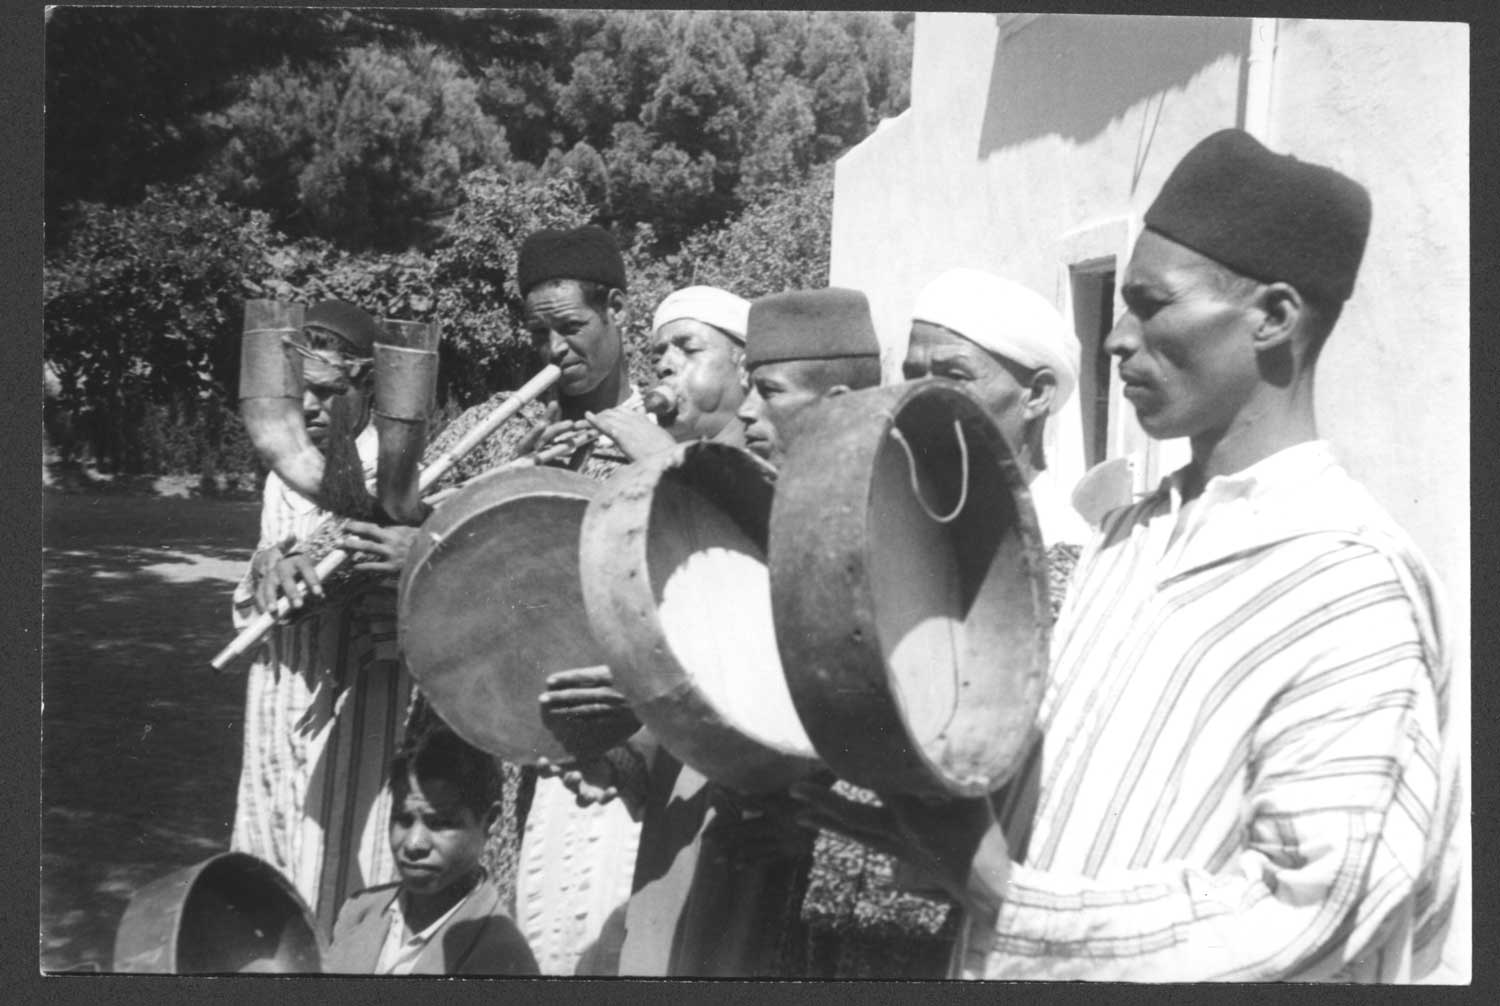 Musicians of the Beni Bouifrour play in Segangan, Morocco